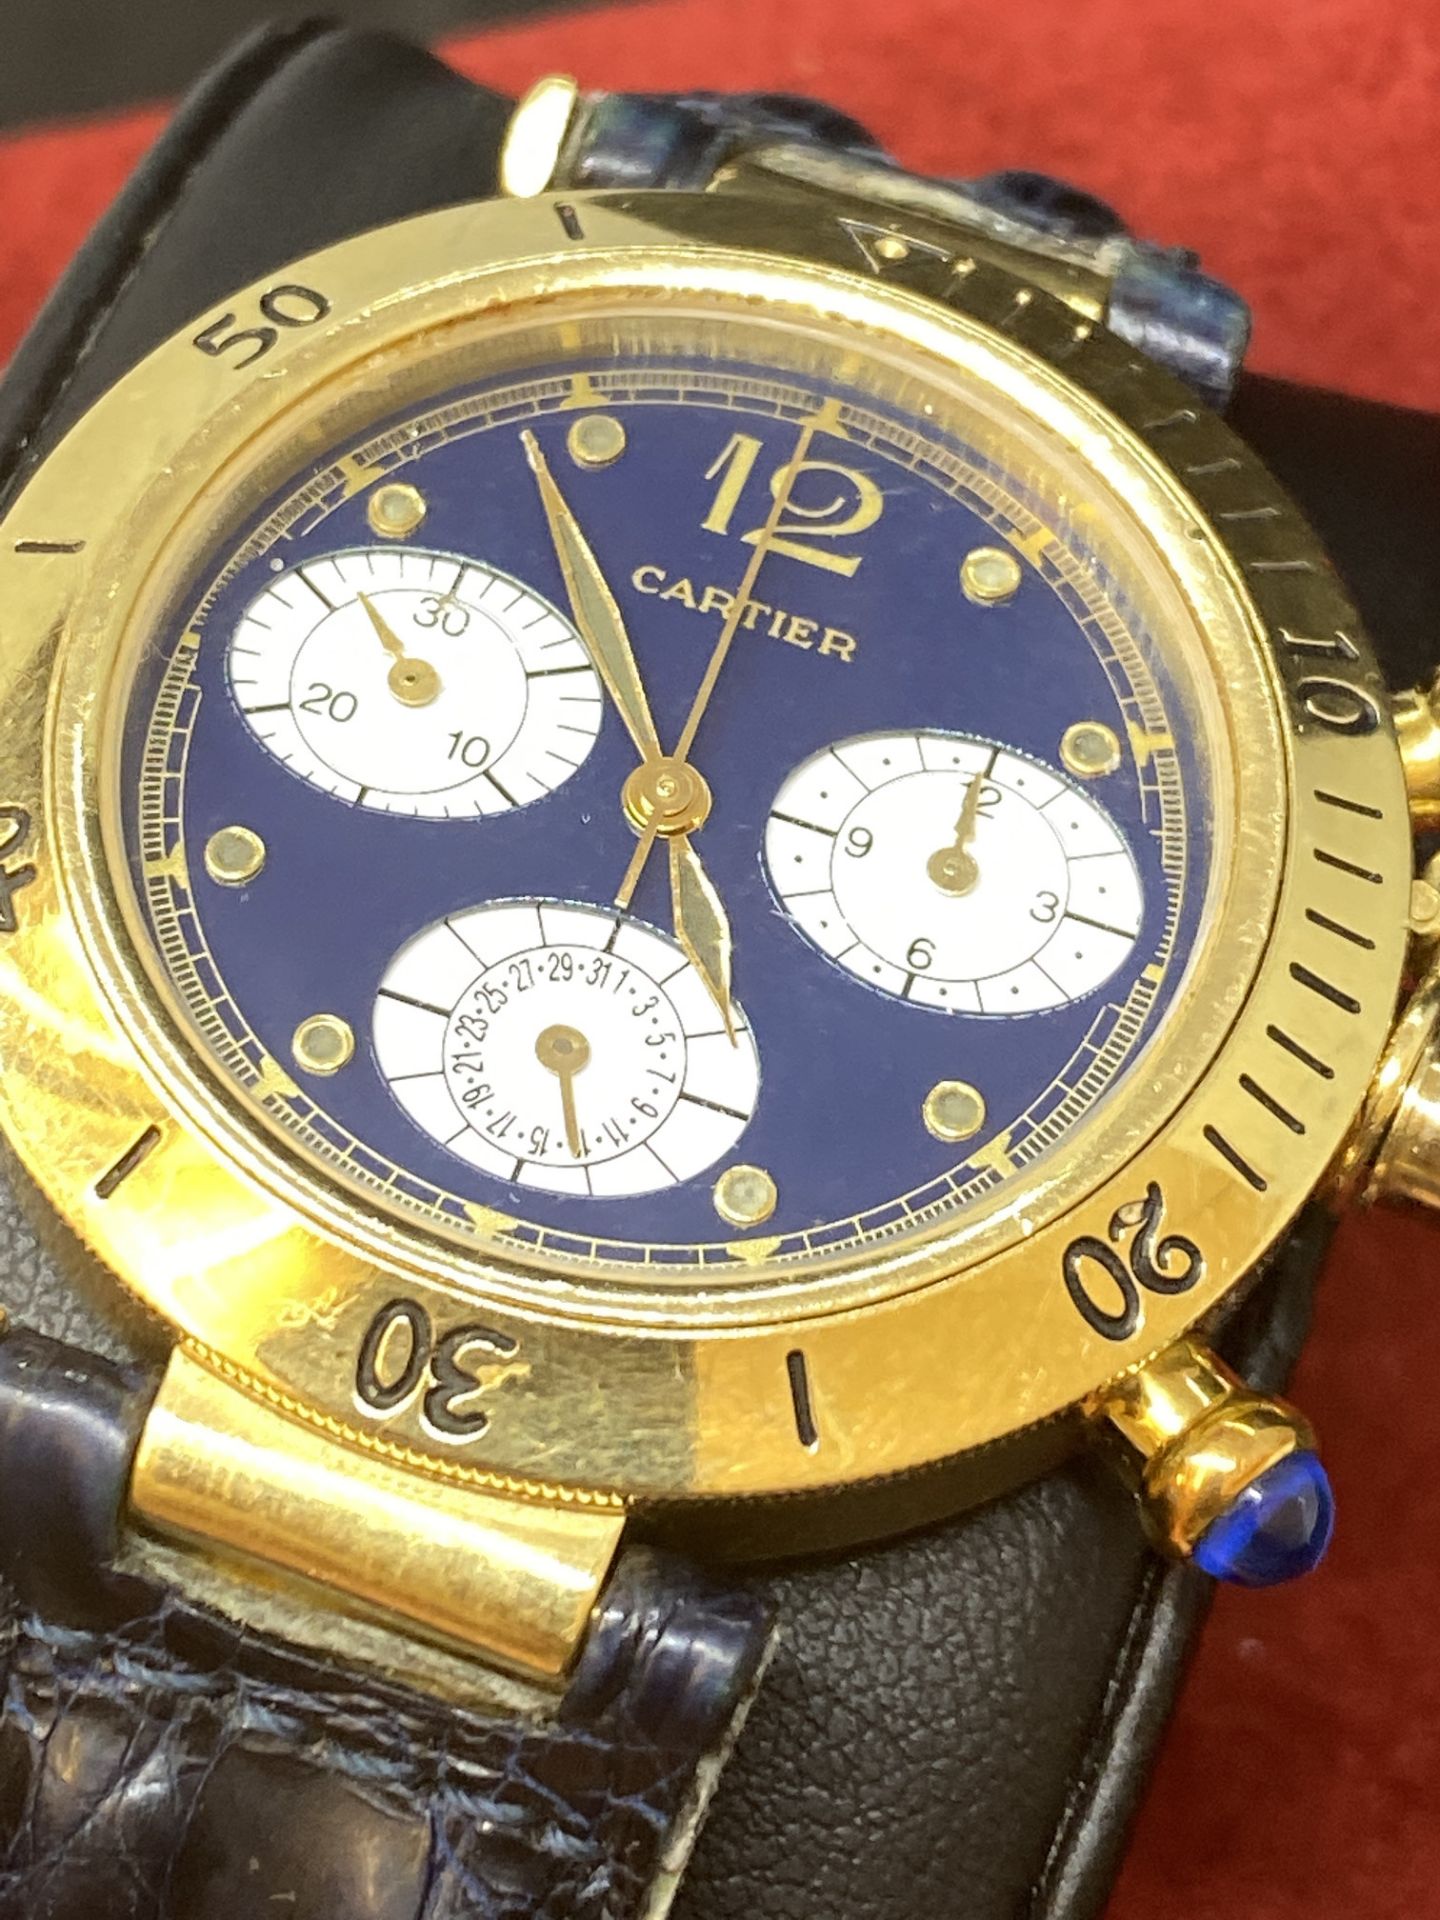 CARTIER CHRONO 18k GOLD WATCH - Image 10 of 12